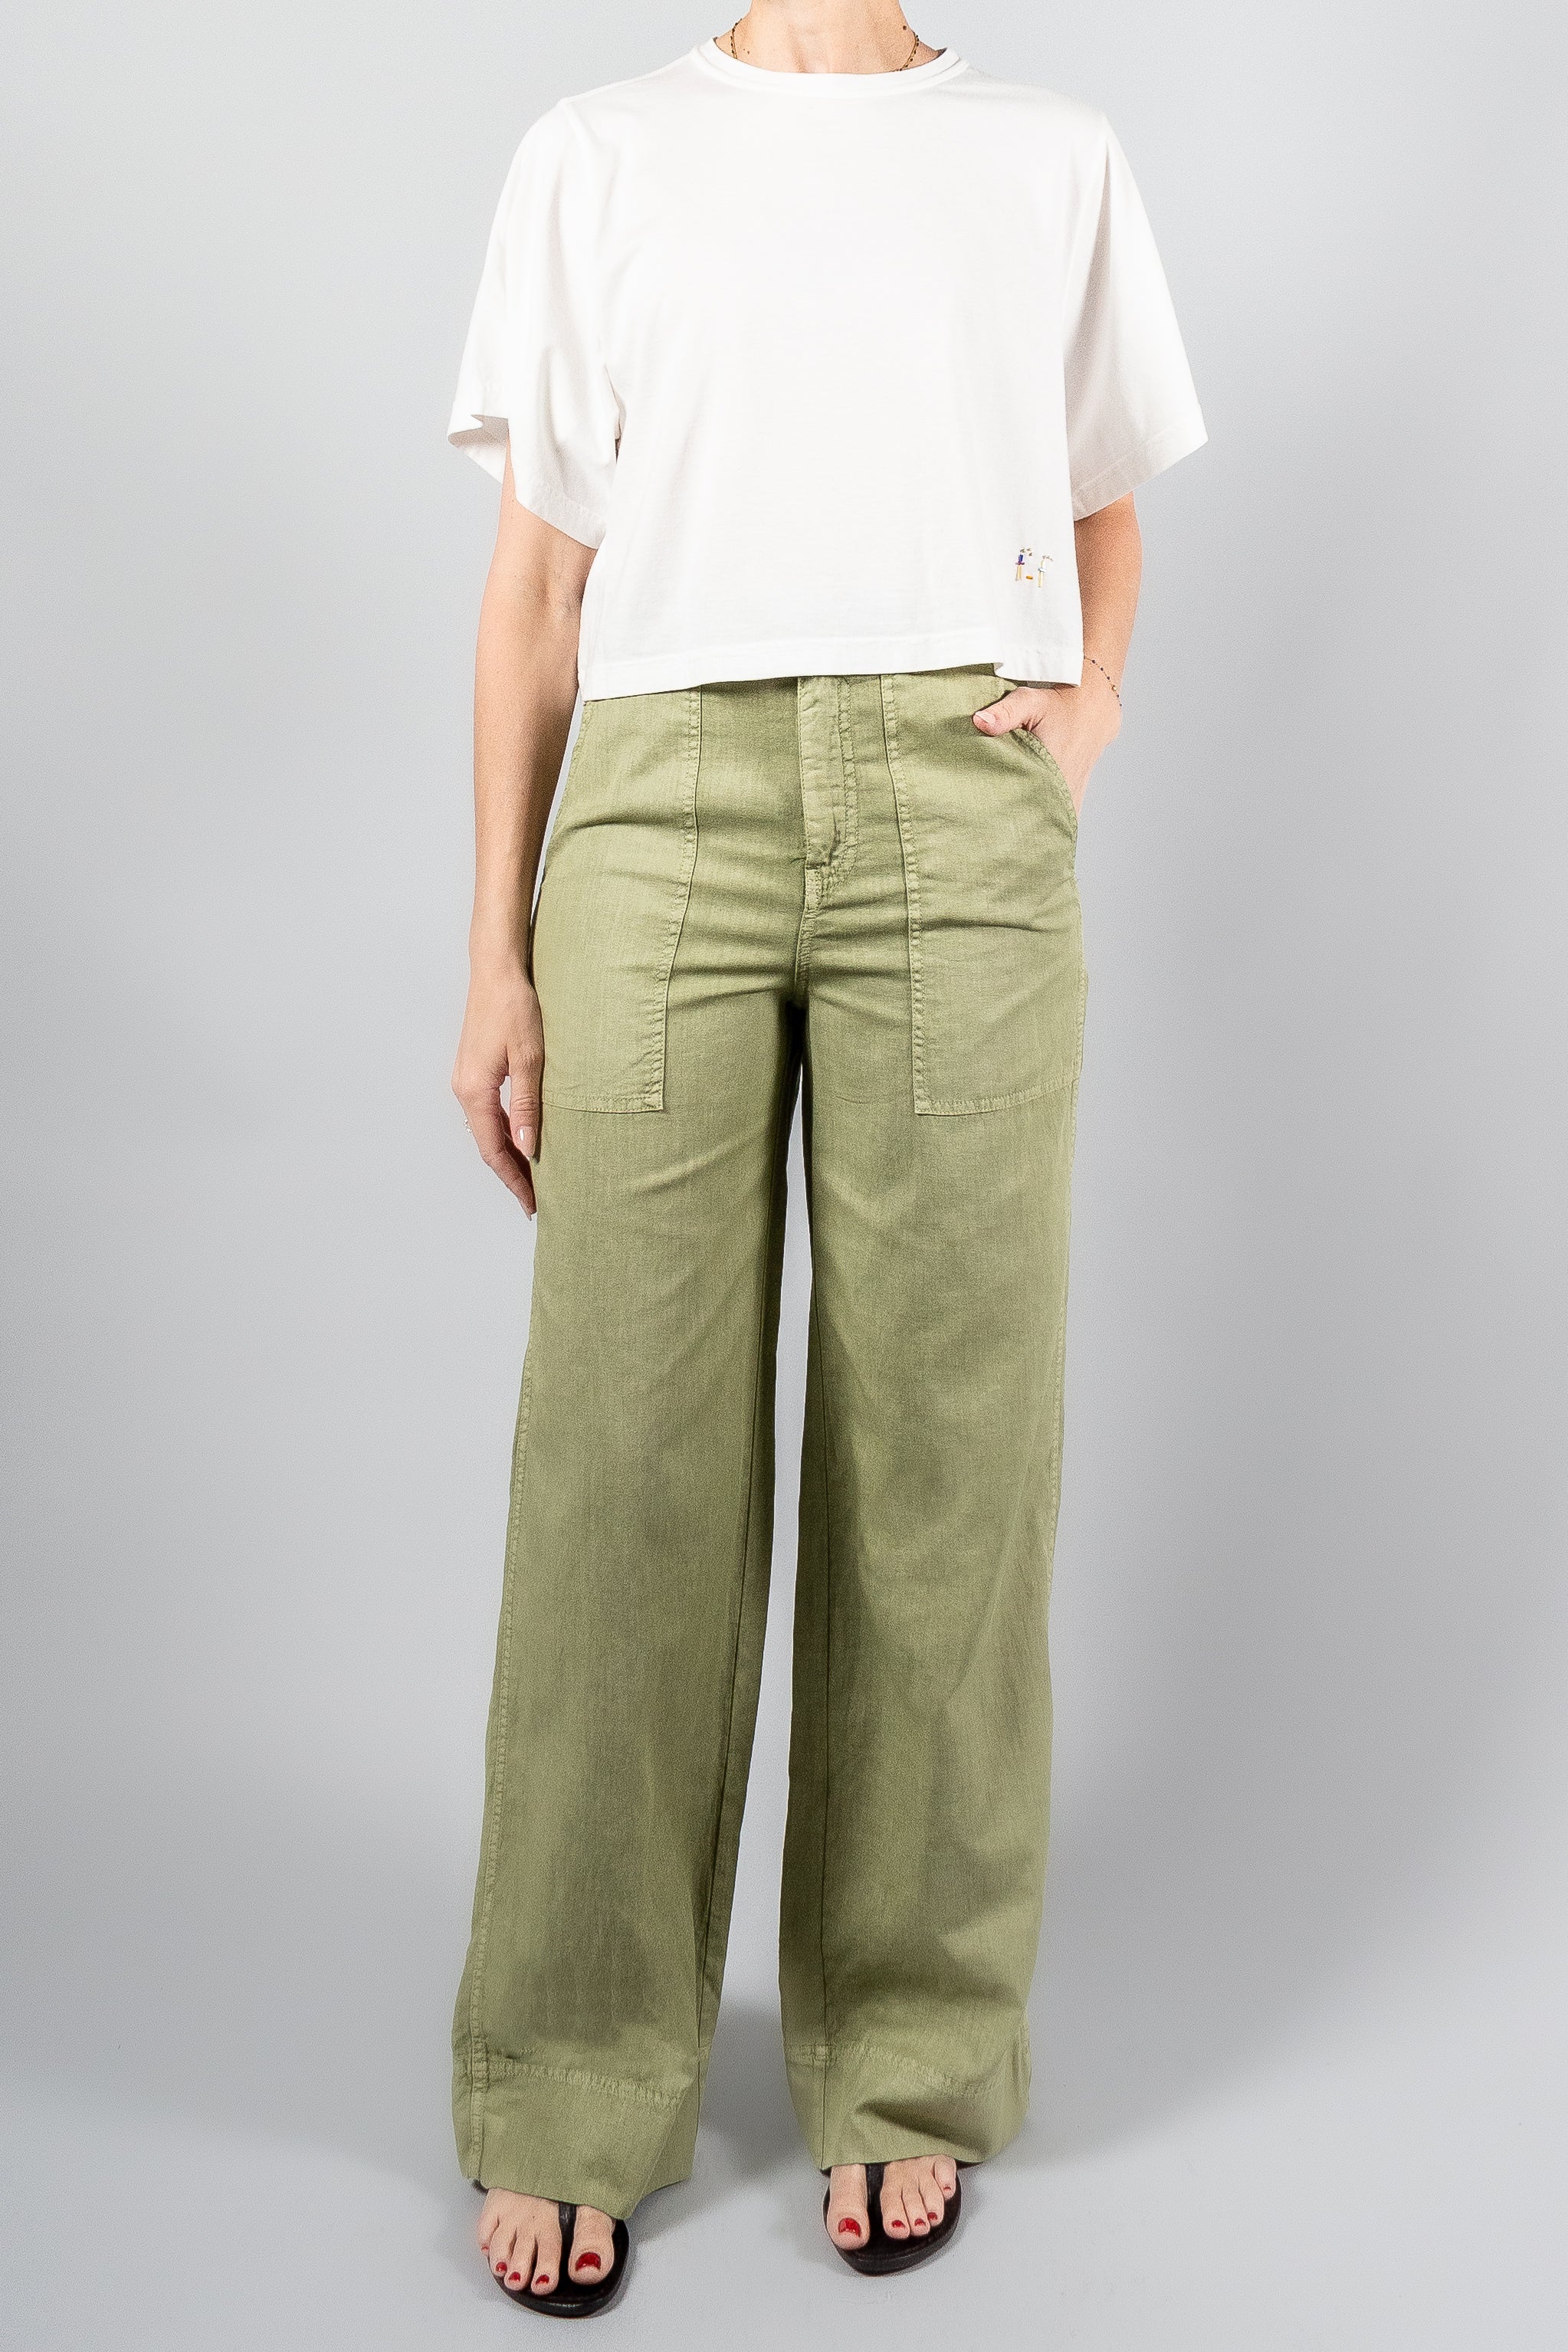 Vanessa Bruno Carlos Pant-Pants and Shorts-Misch-Boutique-Vancouver-Canada-misch.ca